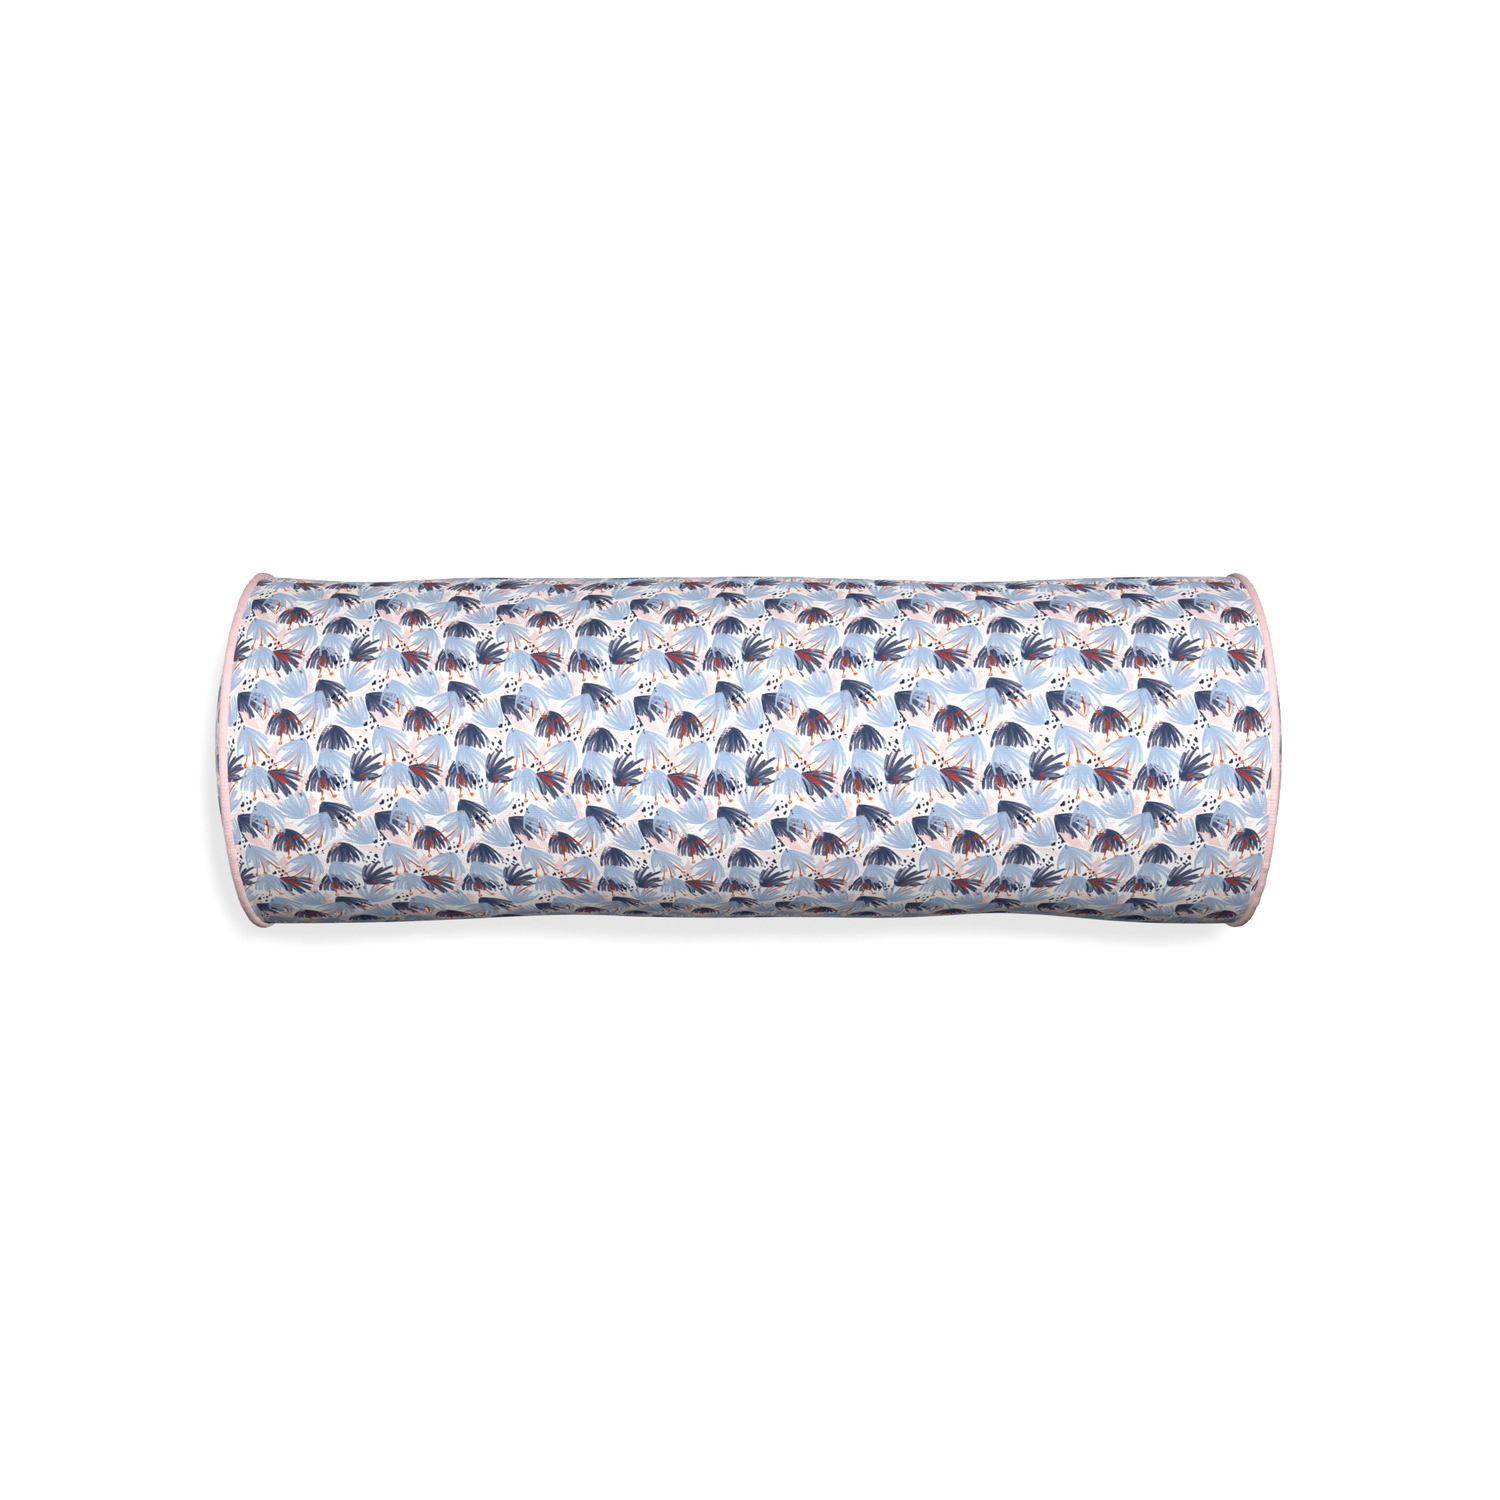 Bolster eden blue custom red and bluepillow with petal piping on white background